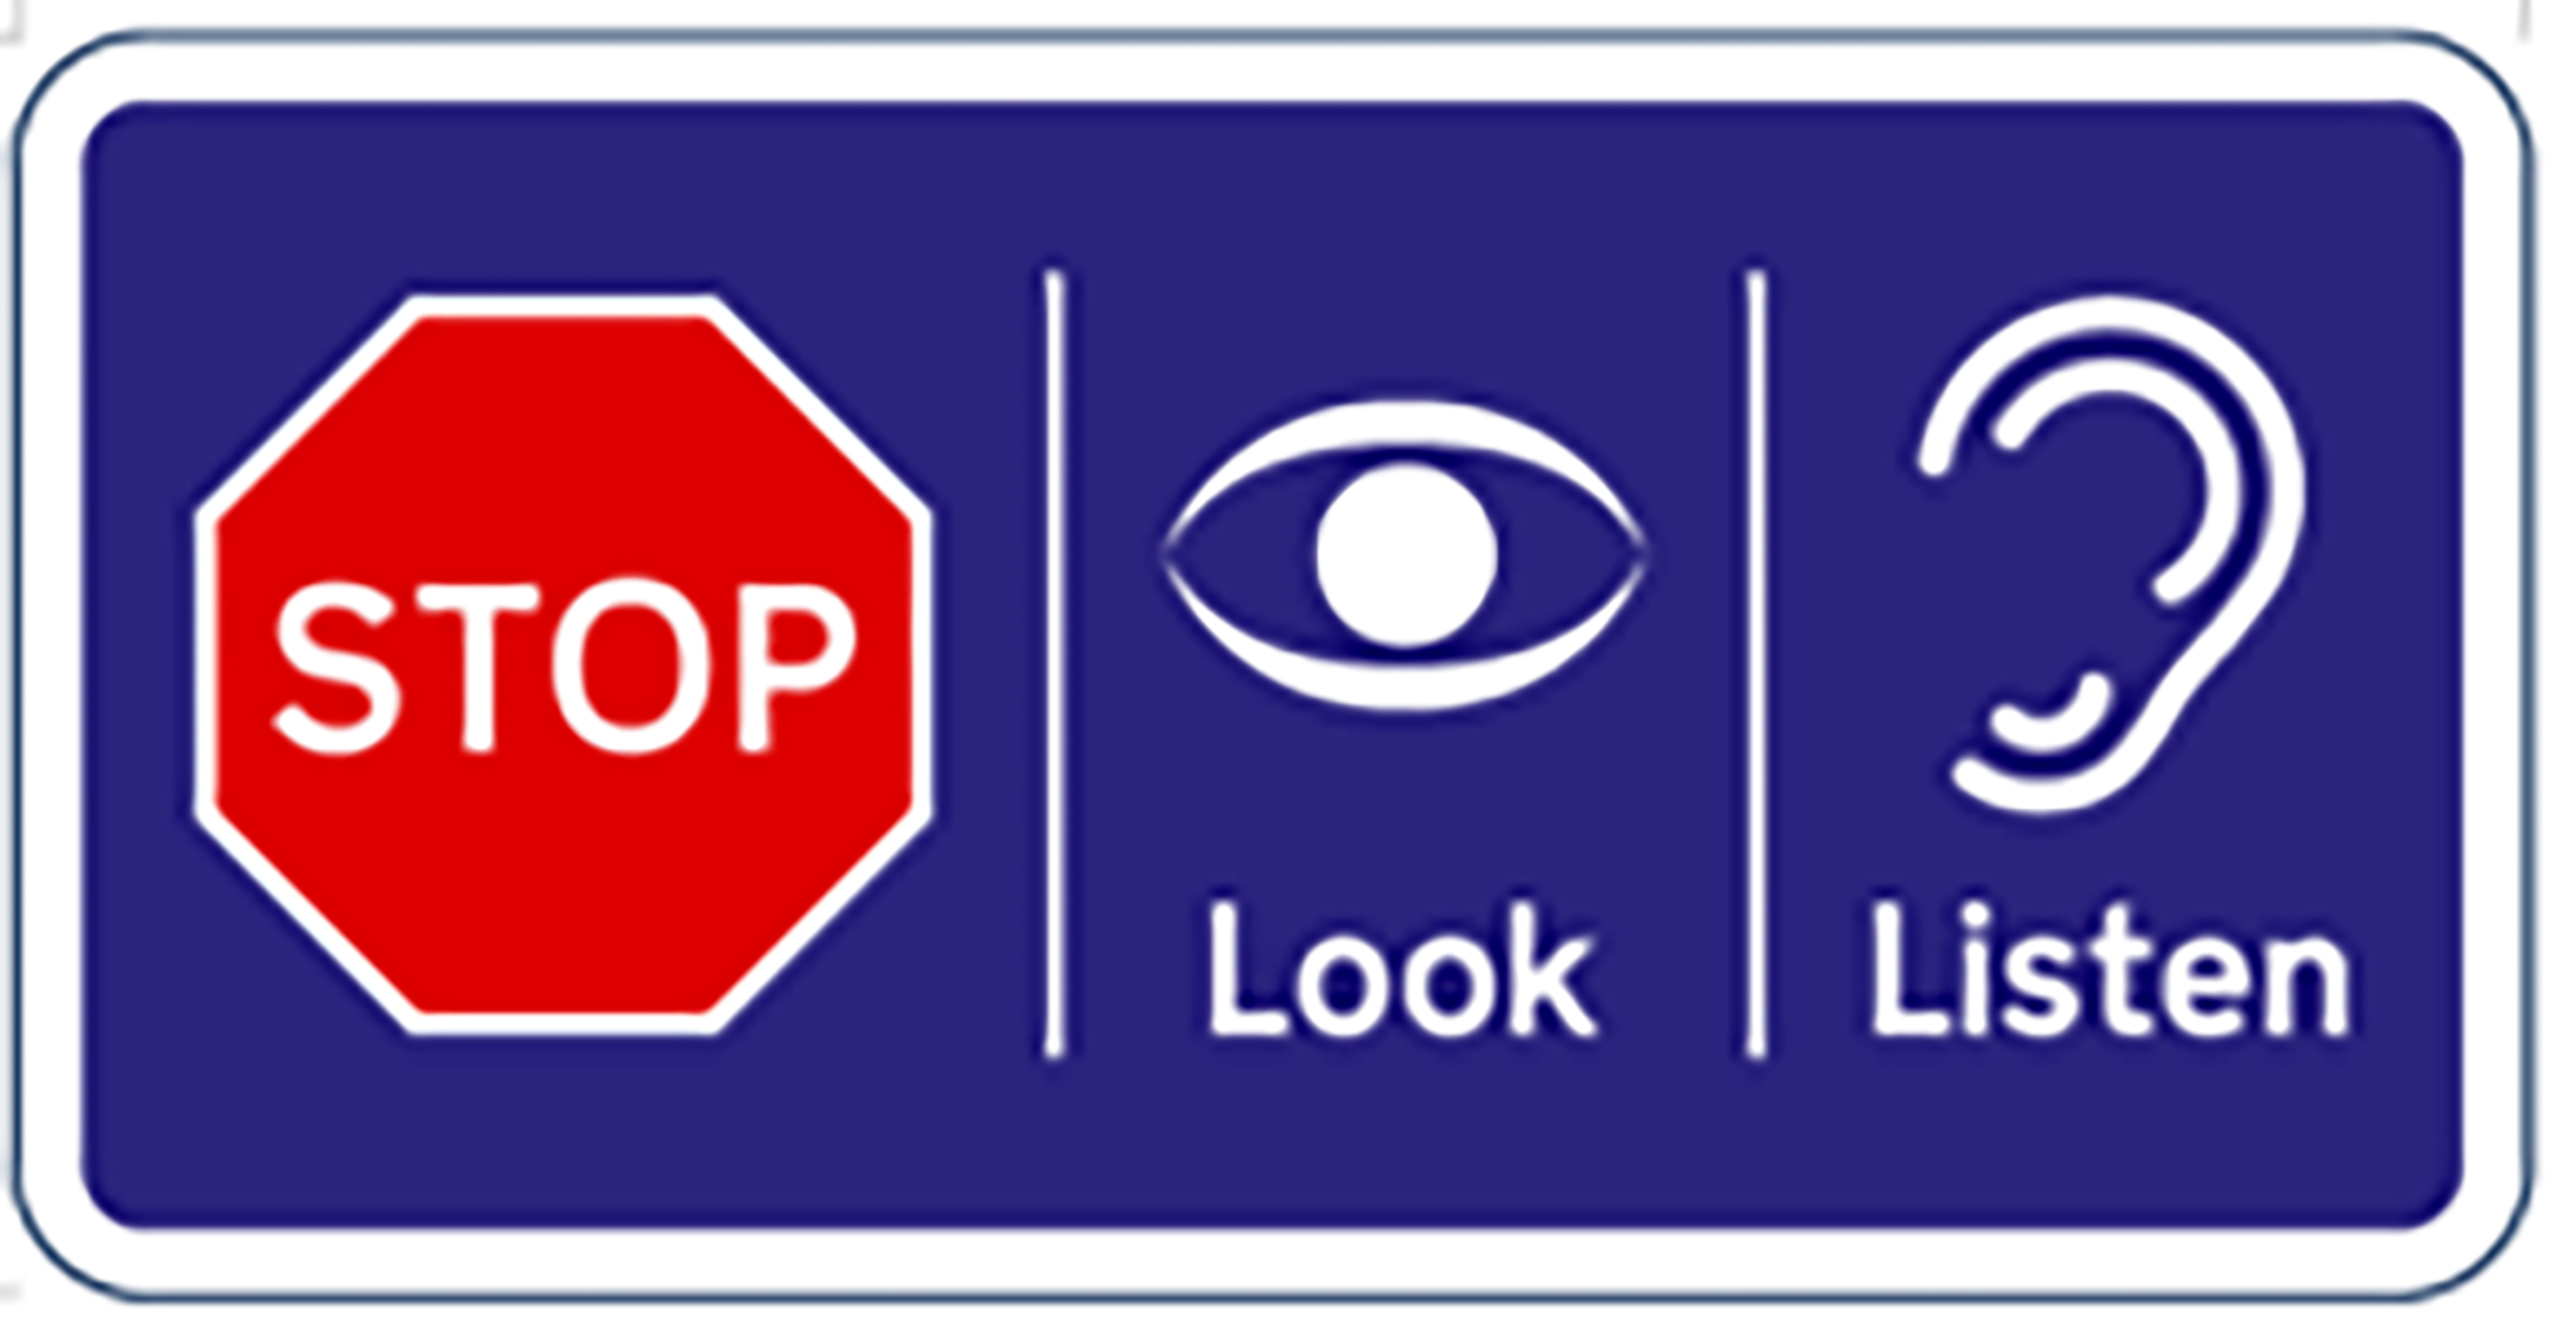 A proposed new sign for private level crossings